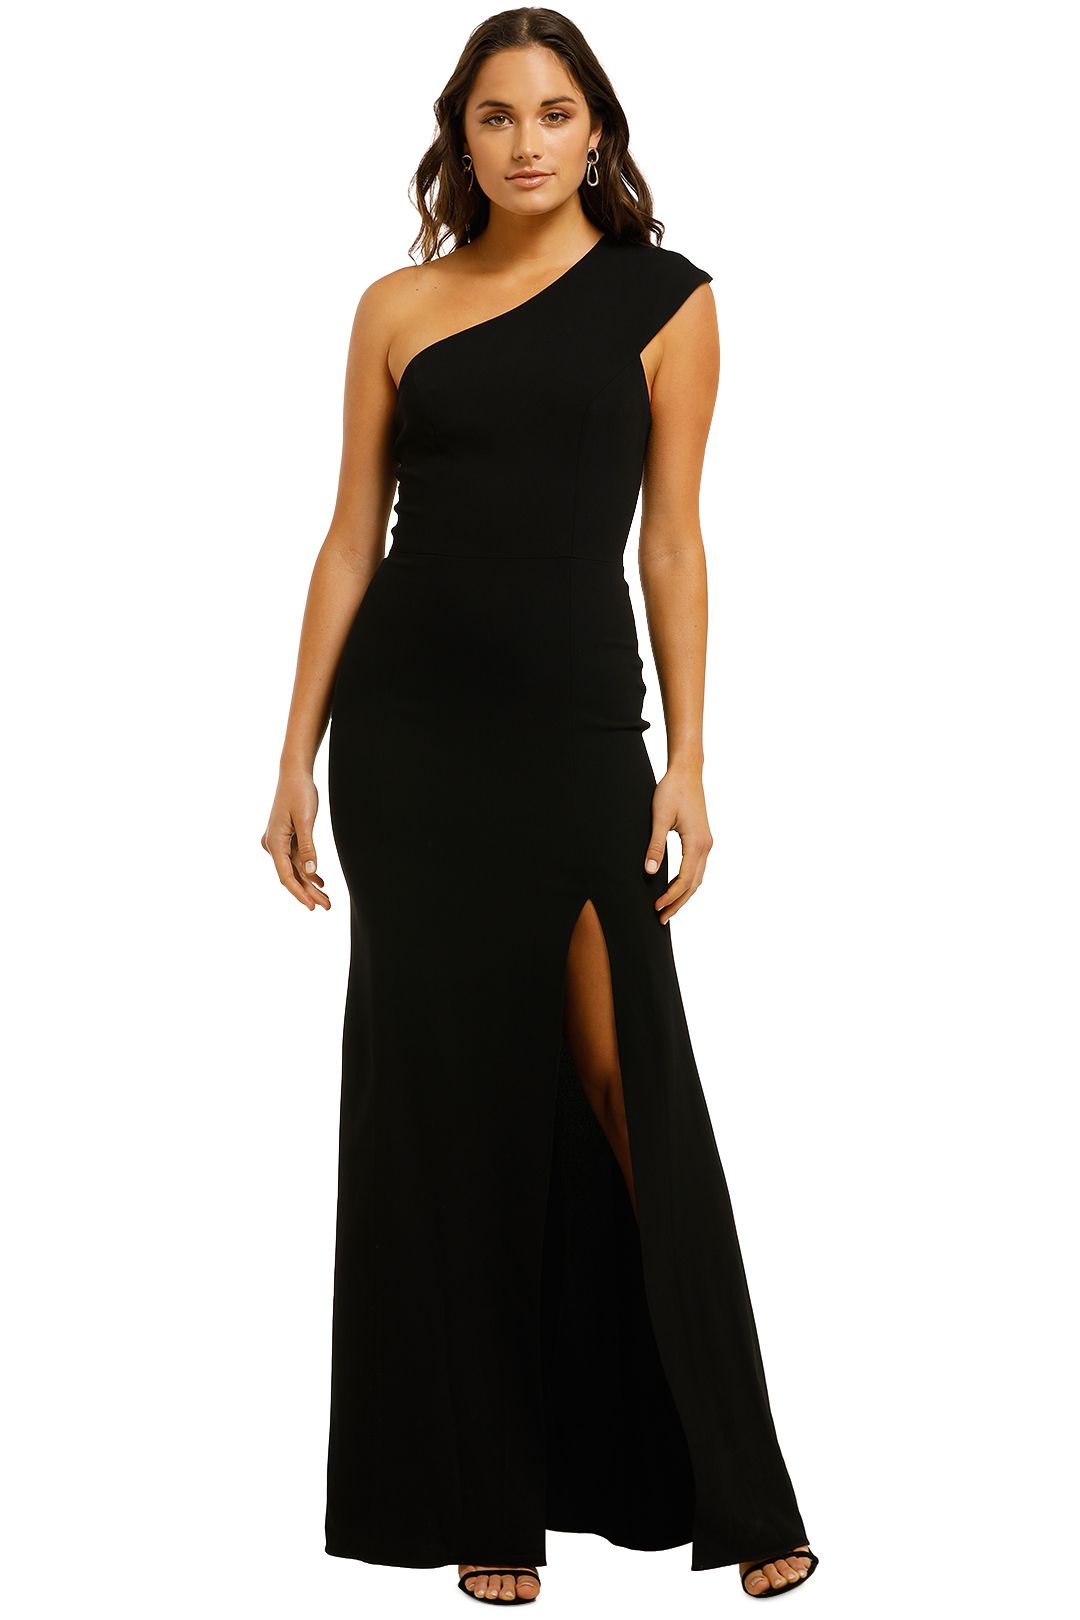 ginger and smart elixer gown black front